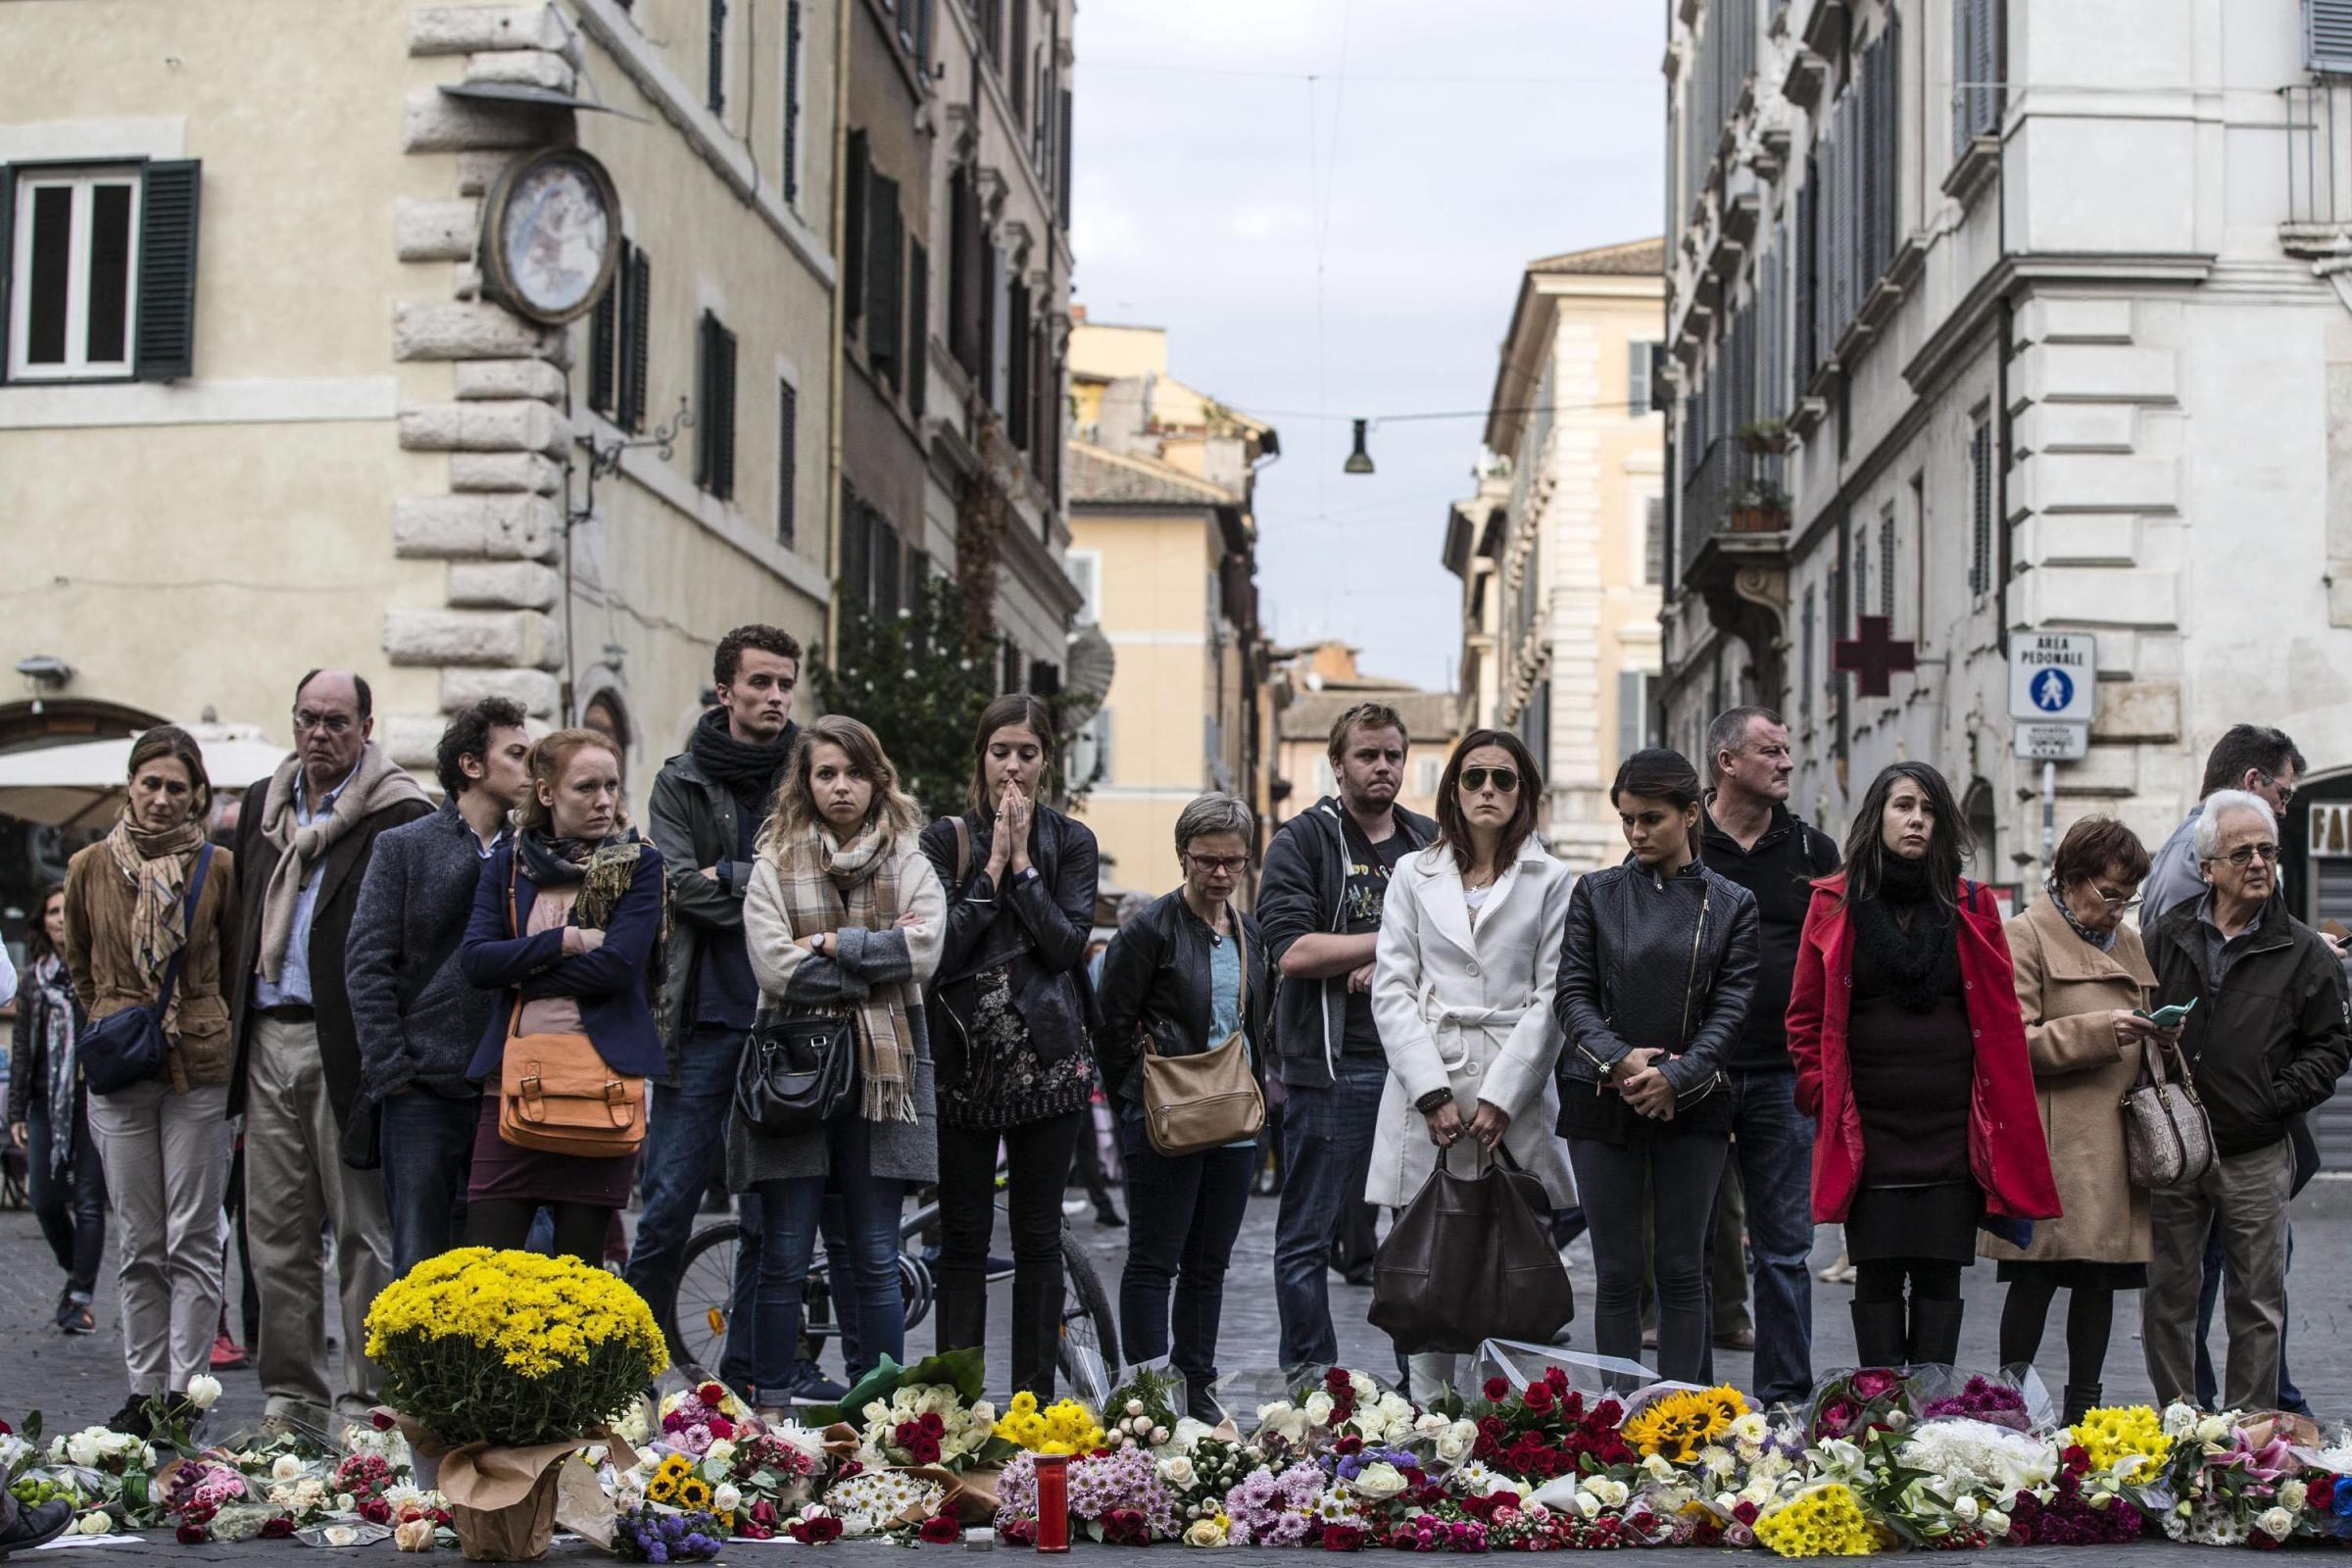 Paris attacks aftermath - reactions in Rome